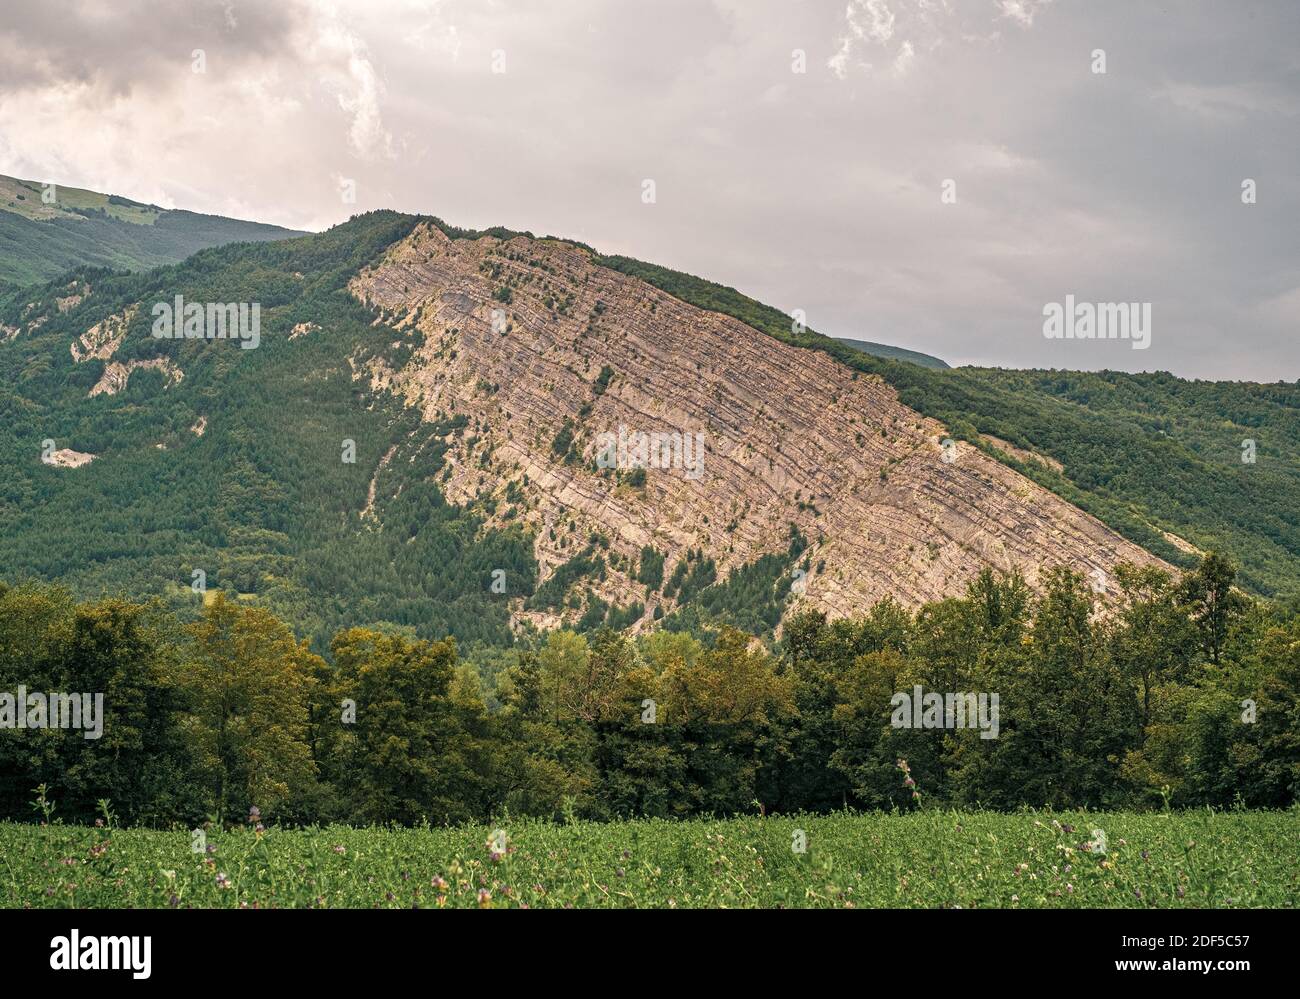 Geological fault in woodland landscape, rocky outcrop with visible ground layers. Modena province, Emilia and Romagna, Italy. Stock Photo